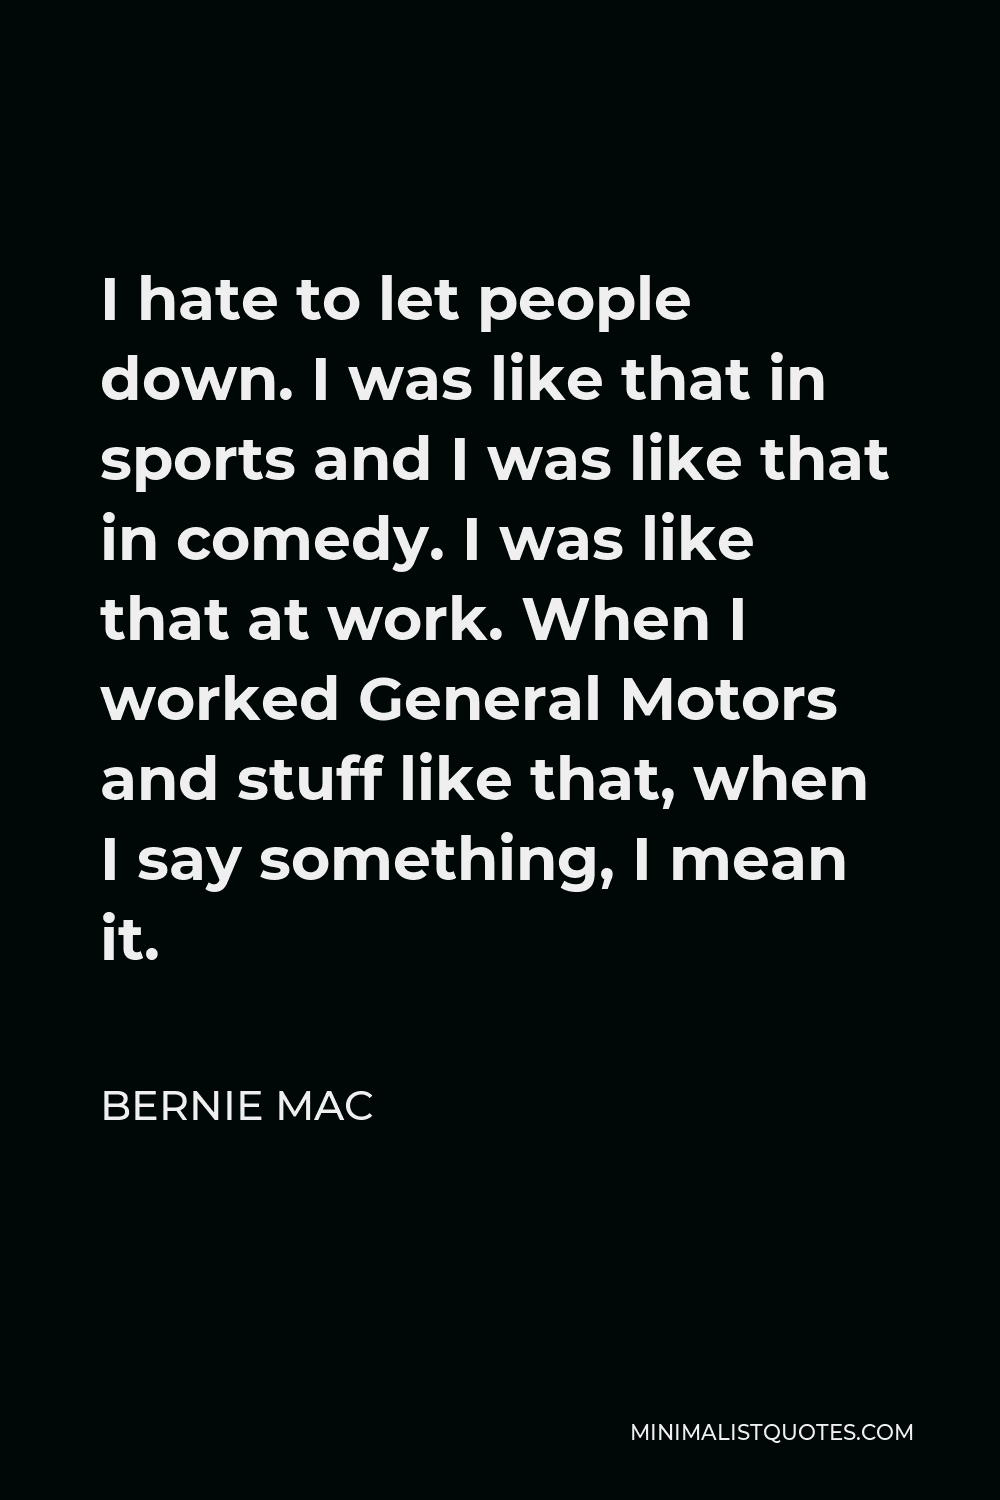 Bernie Mac Quote - I hate to let people down. I was like that in sports and I was like that in comedy. I was like that at work. When I worked General Motors and stuff like that, when I say something, I mean it.